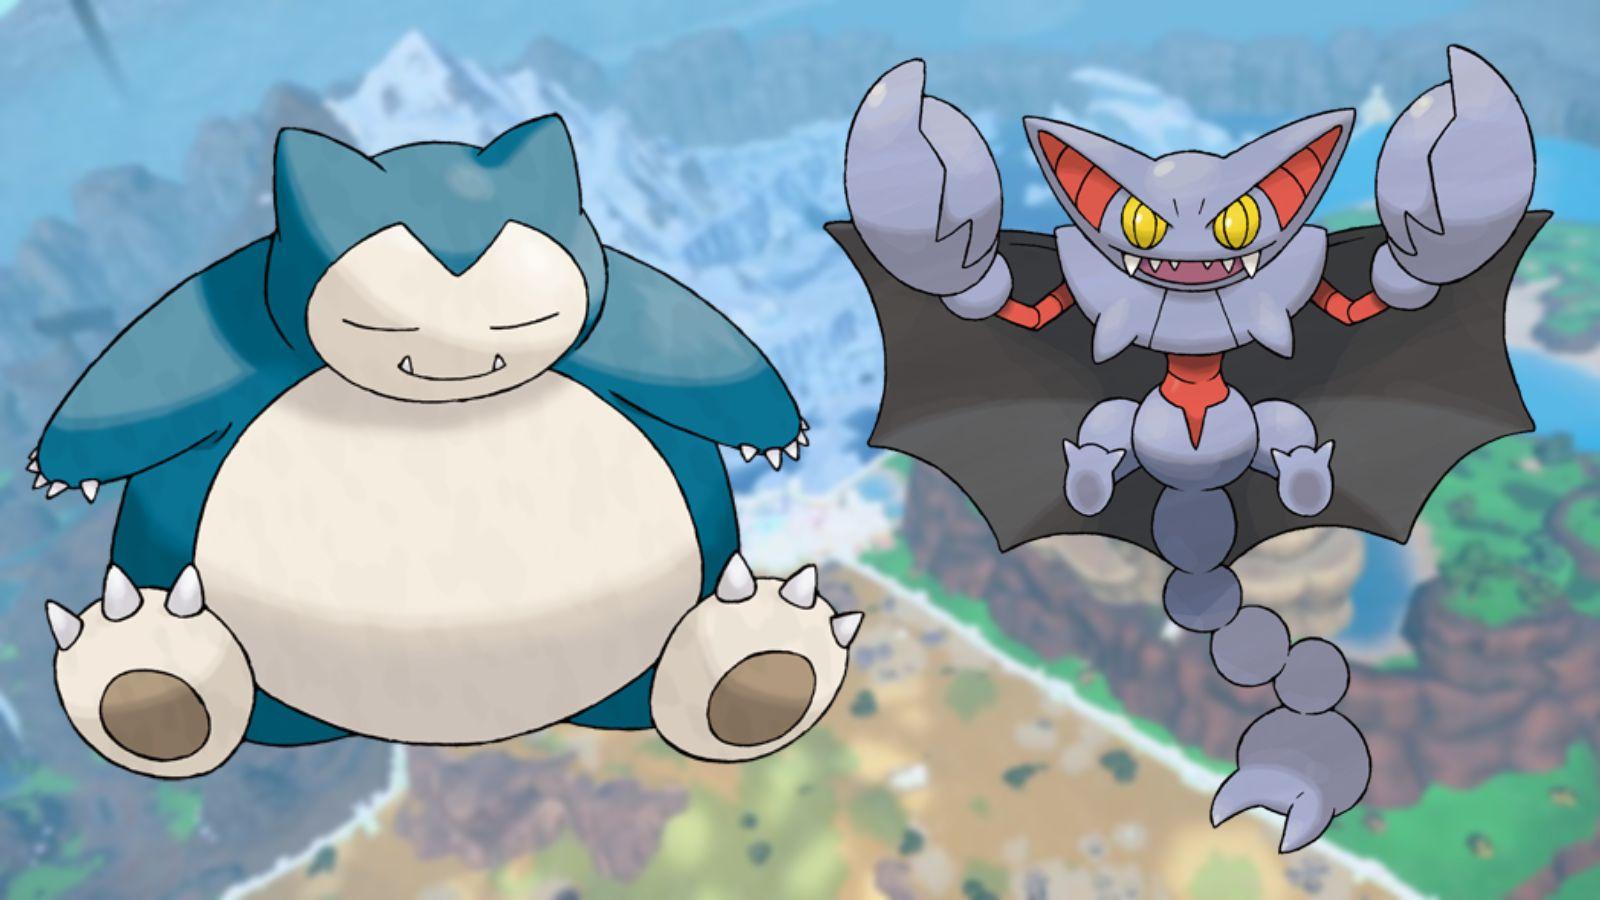 All New Pokémon coming to Scarlet and Violet DLC